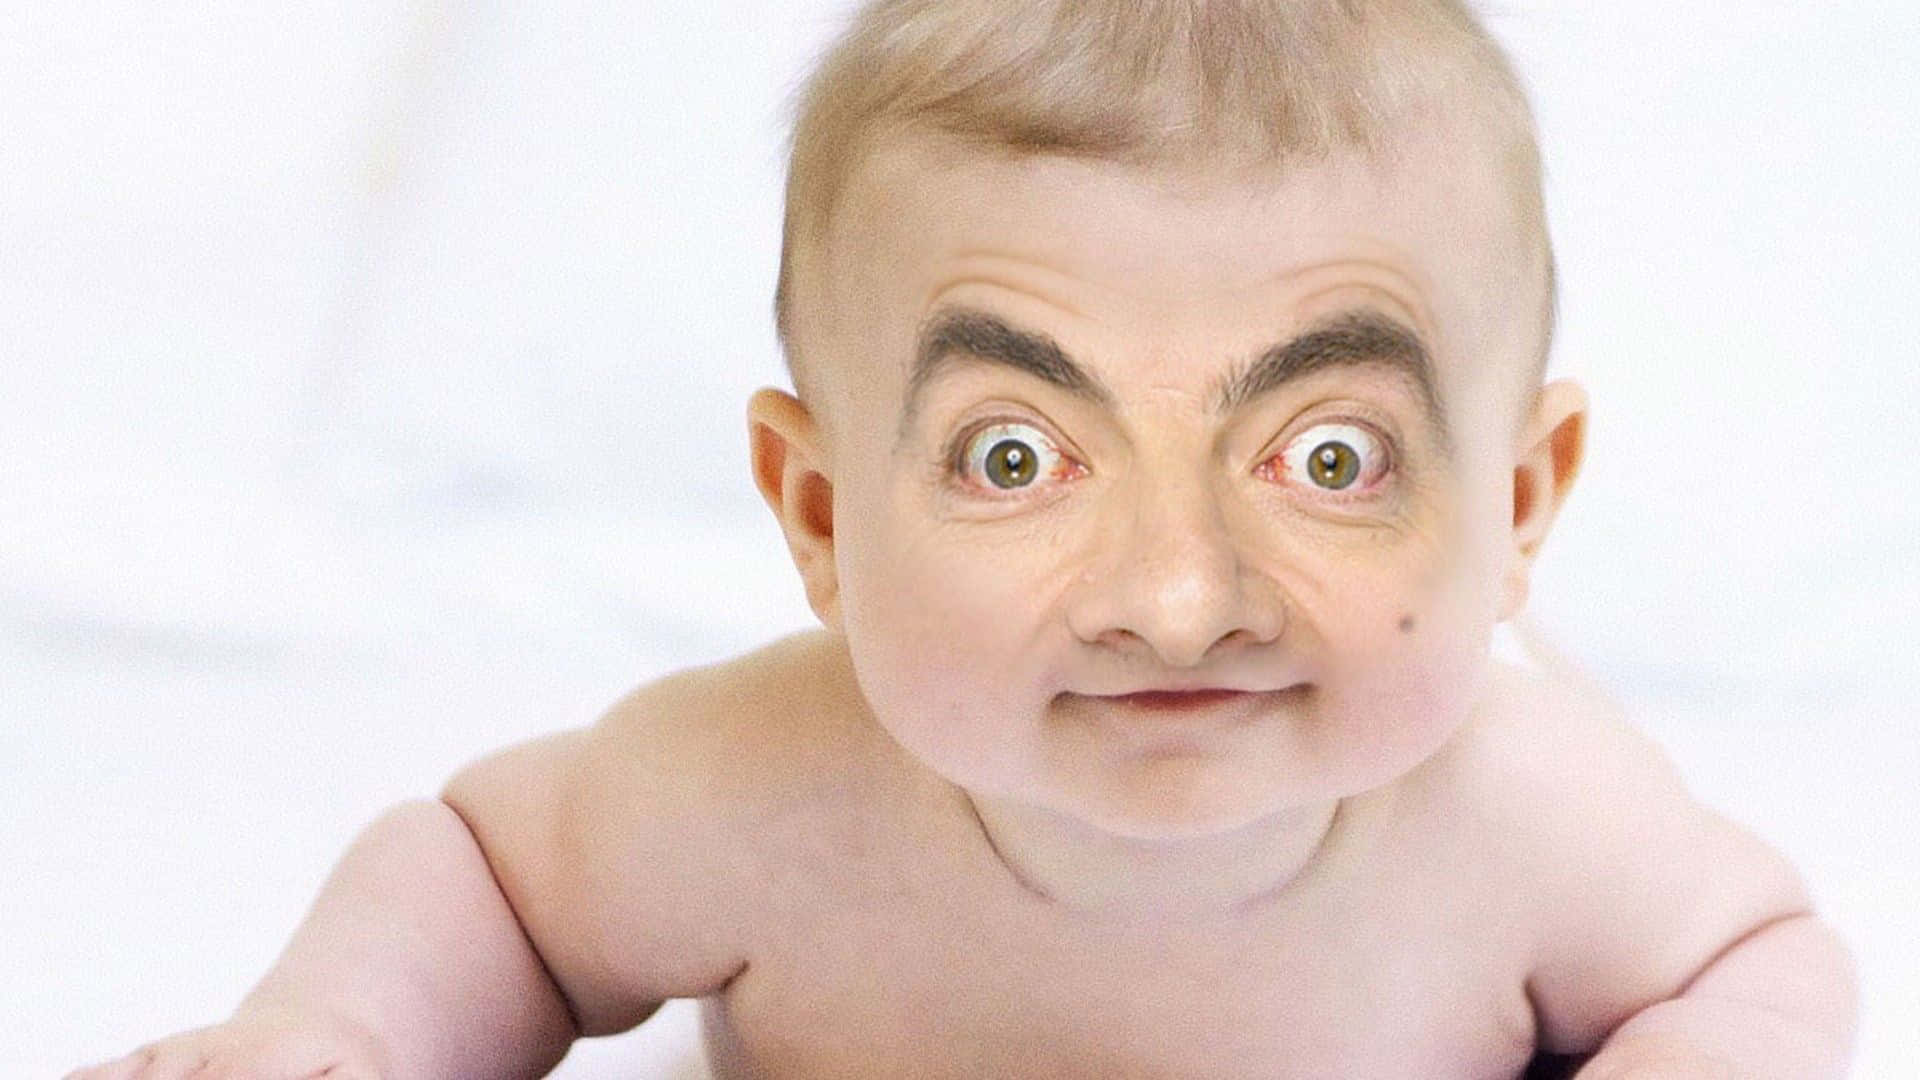 Weird Edit Mr. Bean On Baby's Face Picture